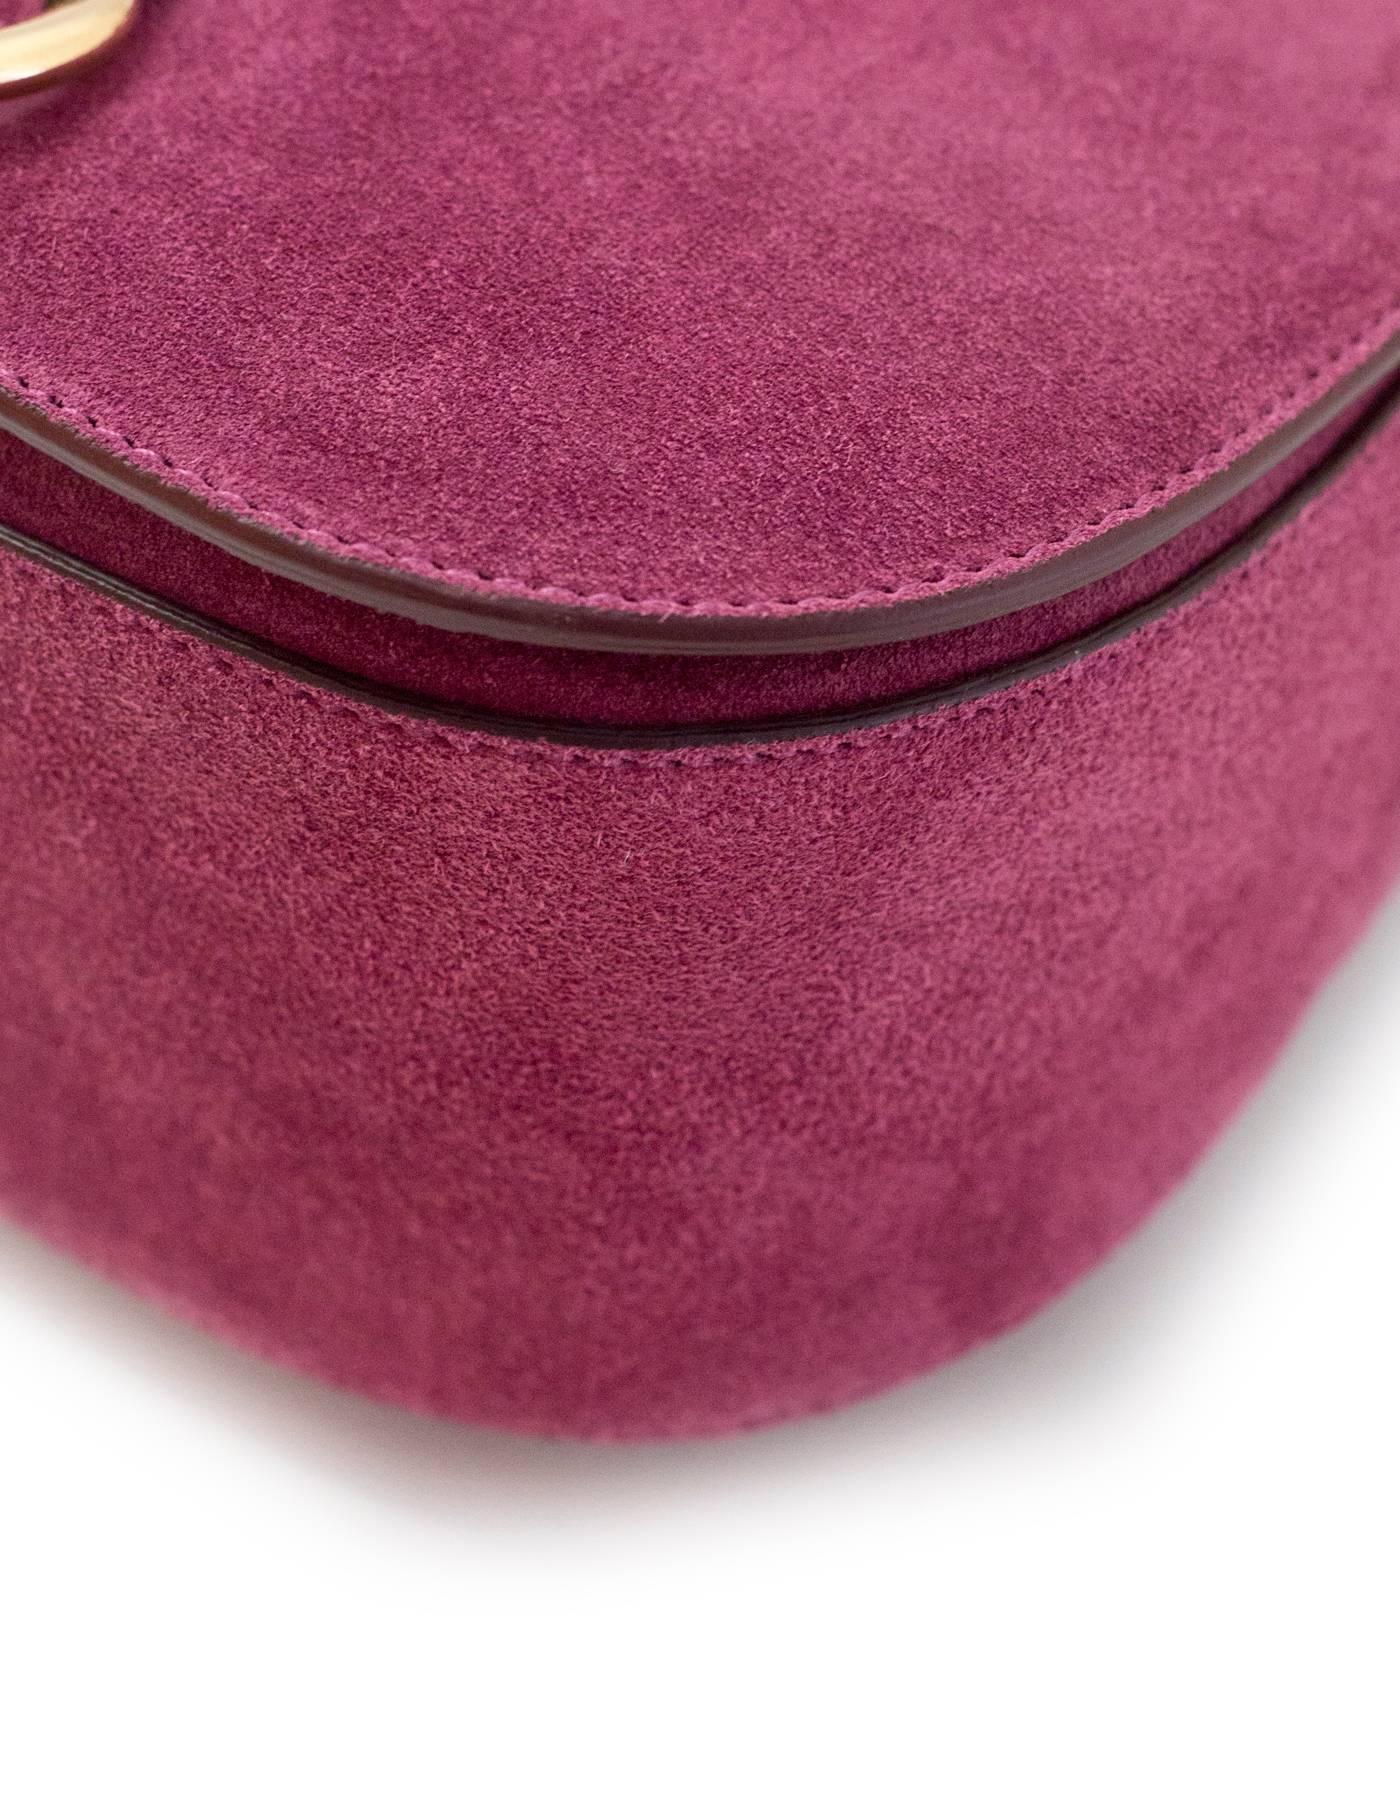 Purple Little Liffner Raspberry Suede Saddle Messenger Bag NWT with DB